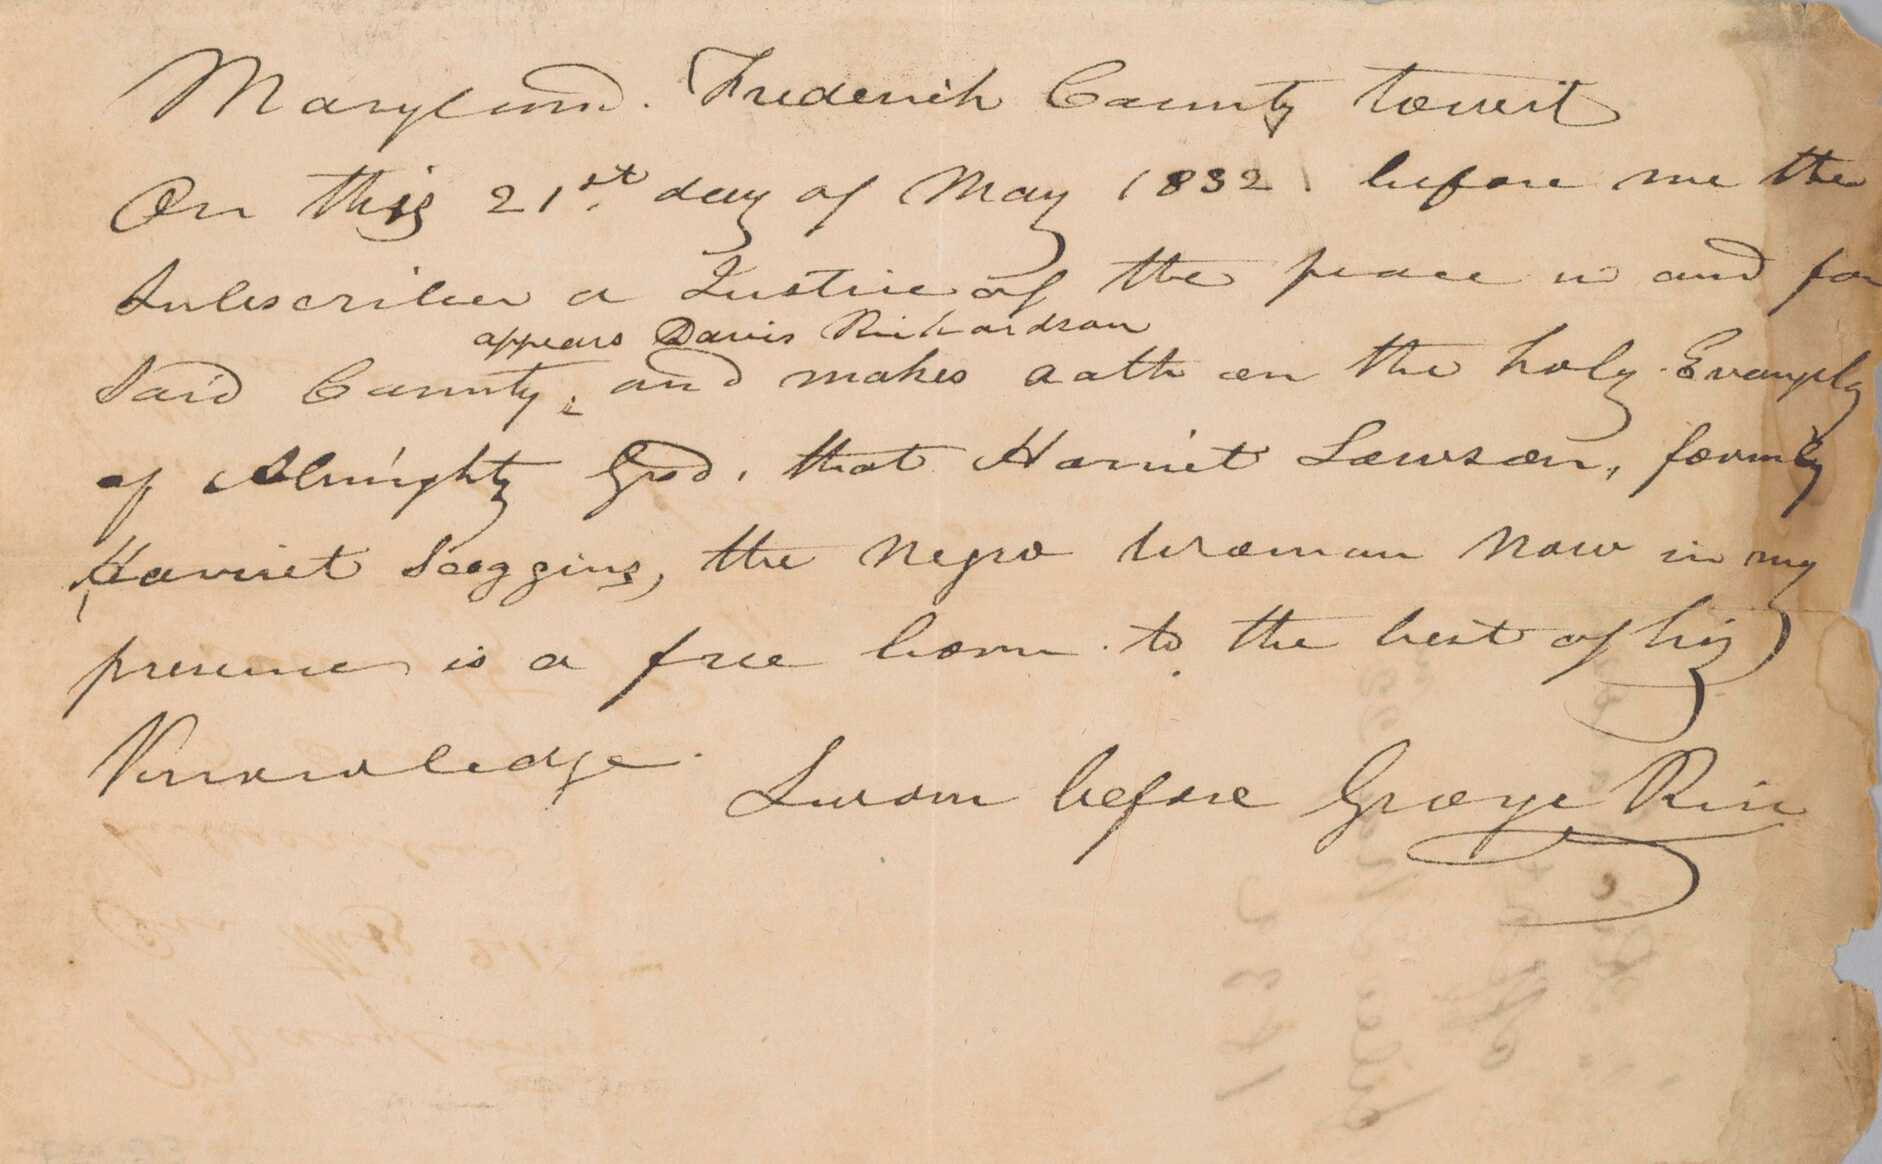 A free woman's pass for Harriet Lawson, a free black woman, to visit her husband Caleb Lawson, signed in Frederick County, Maryland, on May 21, 1832. Davis Richardson is listed as the witness. The pass is on a single sheet of paper. There is handwriting in ink on both recto and verso, handwriting in pencil on verso only. The proper right side has discoloration and abrasions with loss of paper along the edge but no apparent loss of text. The ink writing from the verso side is visible faintly through to the recto side. Creases remain from the pass having been folded twice, once lengthwise and once widthwise.